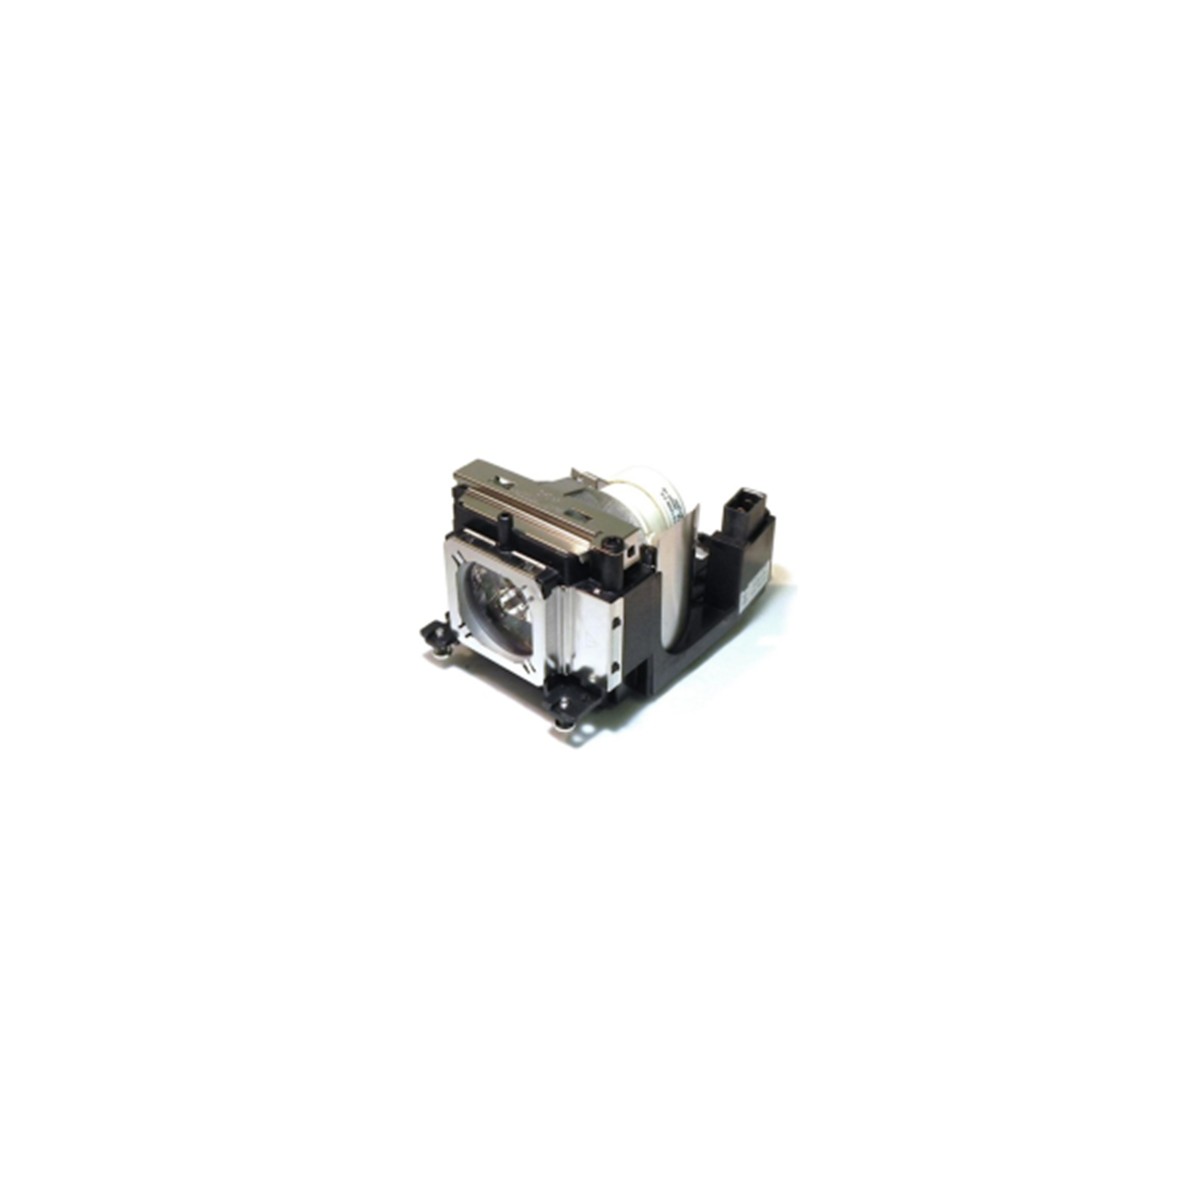 Eiki LC-WS250 Replacement Lamp 610 349 0847